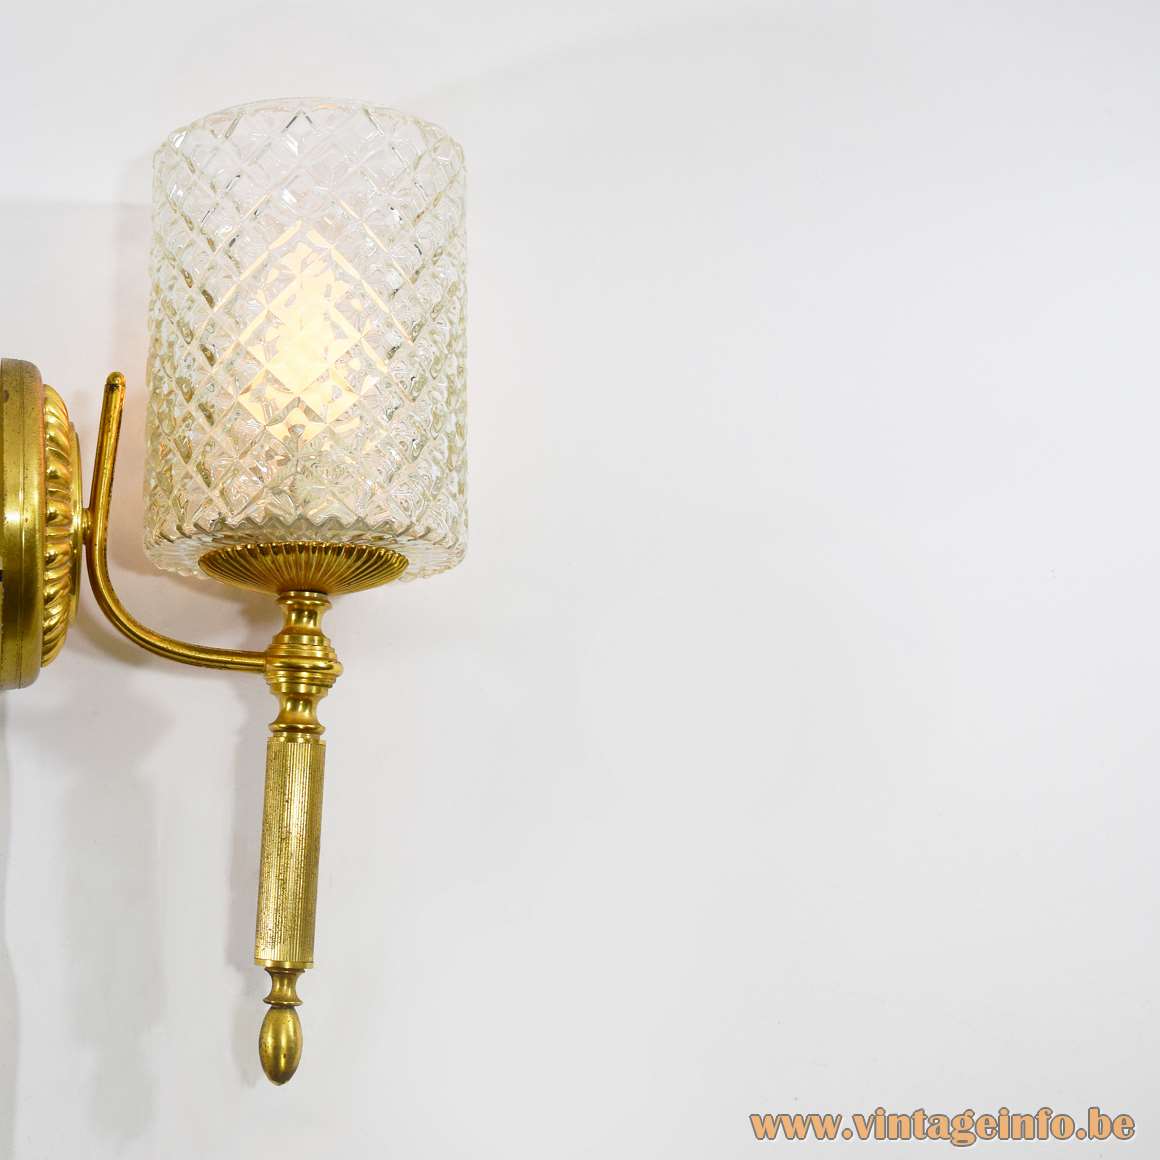 Sciolari Classic Wall Lamp round brass mount brass parts embossed crystal glass 1960s 1970s MCM